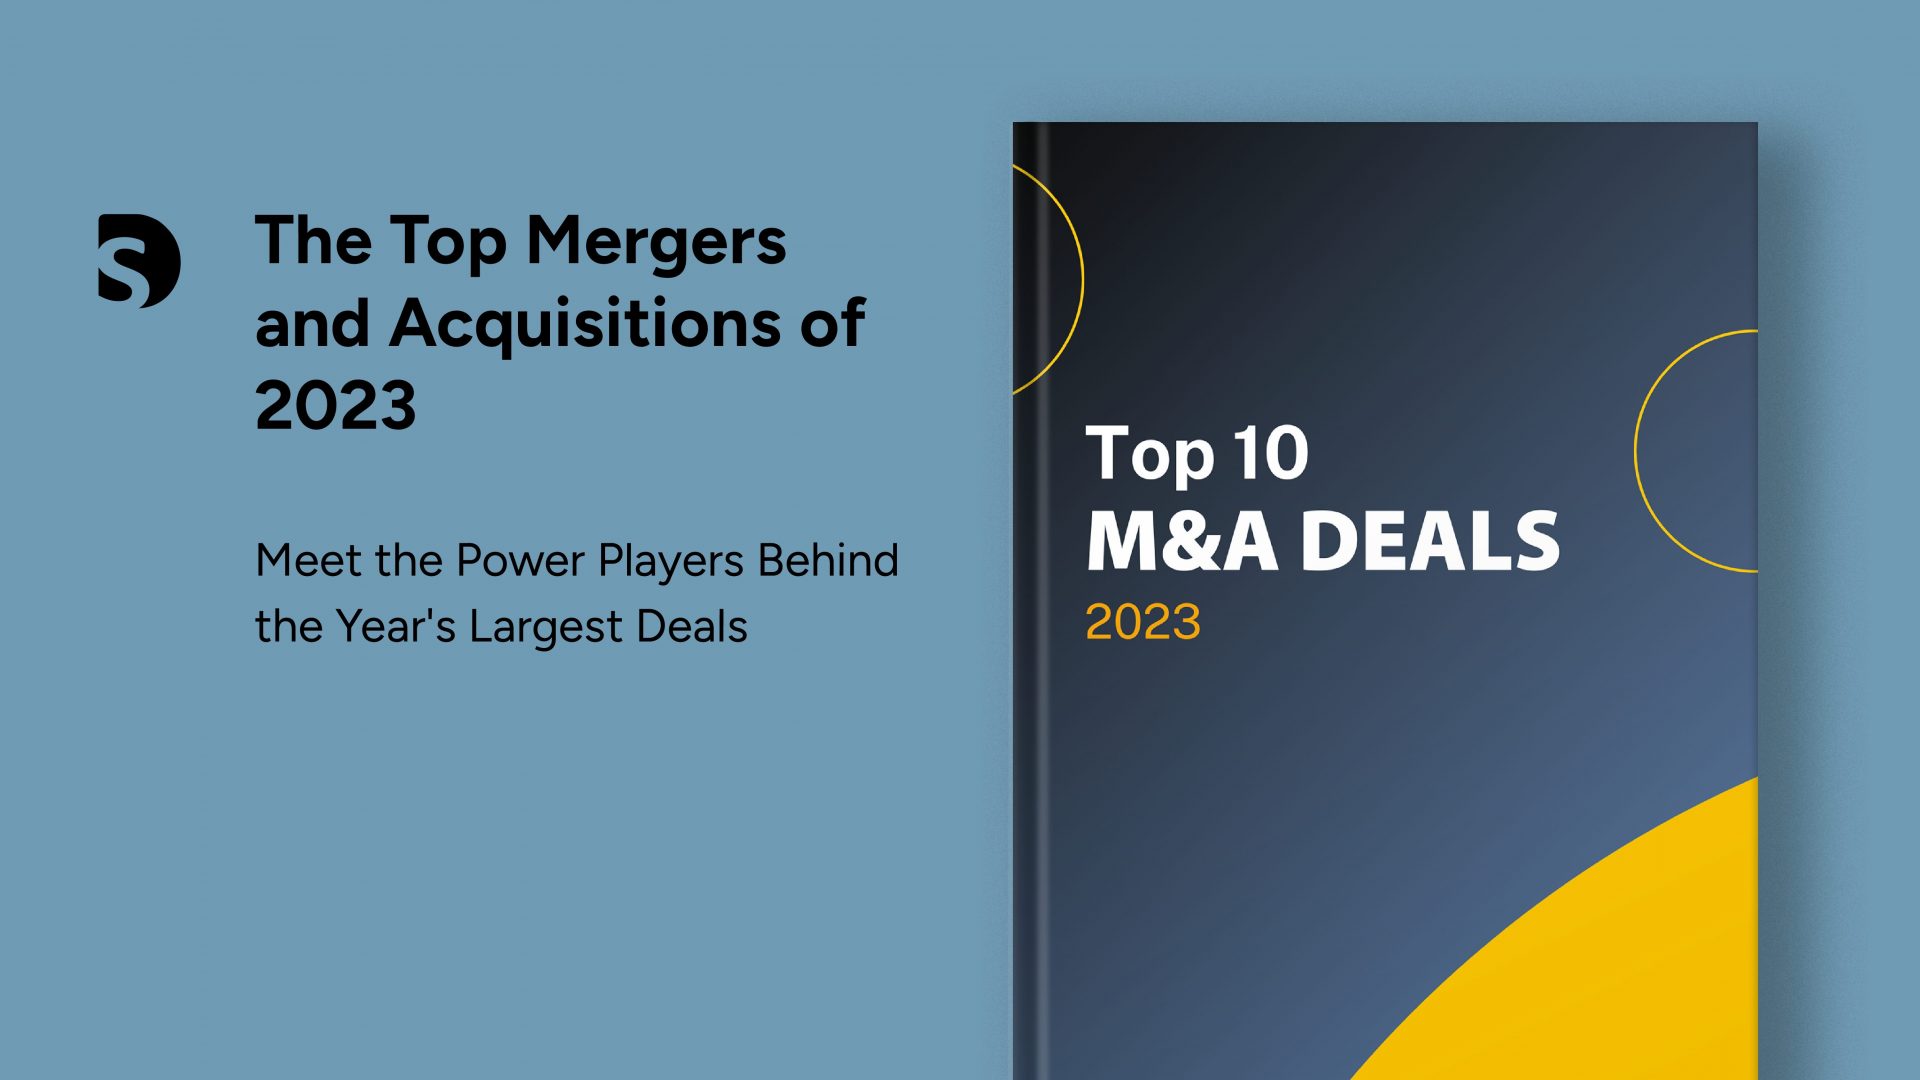 The Top Mergers and Acquisitions of 2023 – Meet the Power Players Behind the Year's Largest Deals